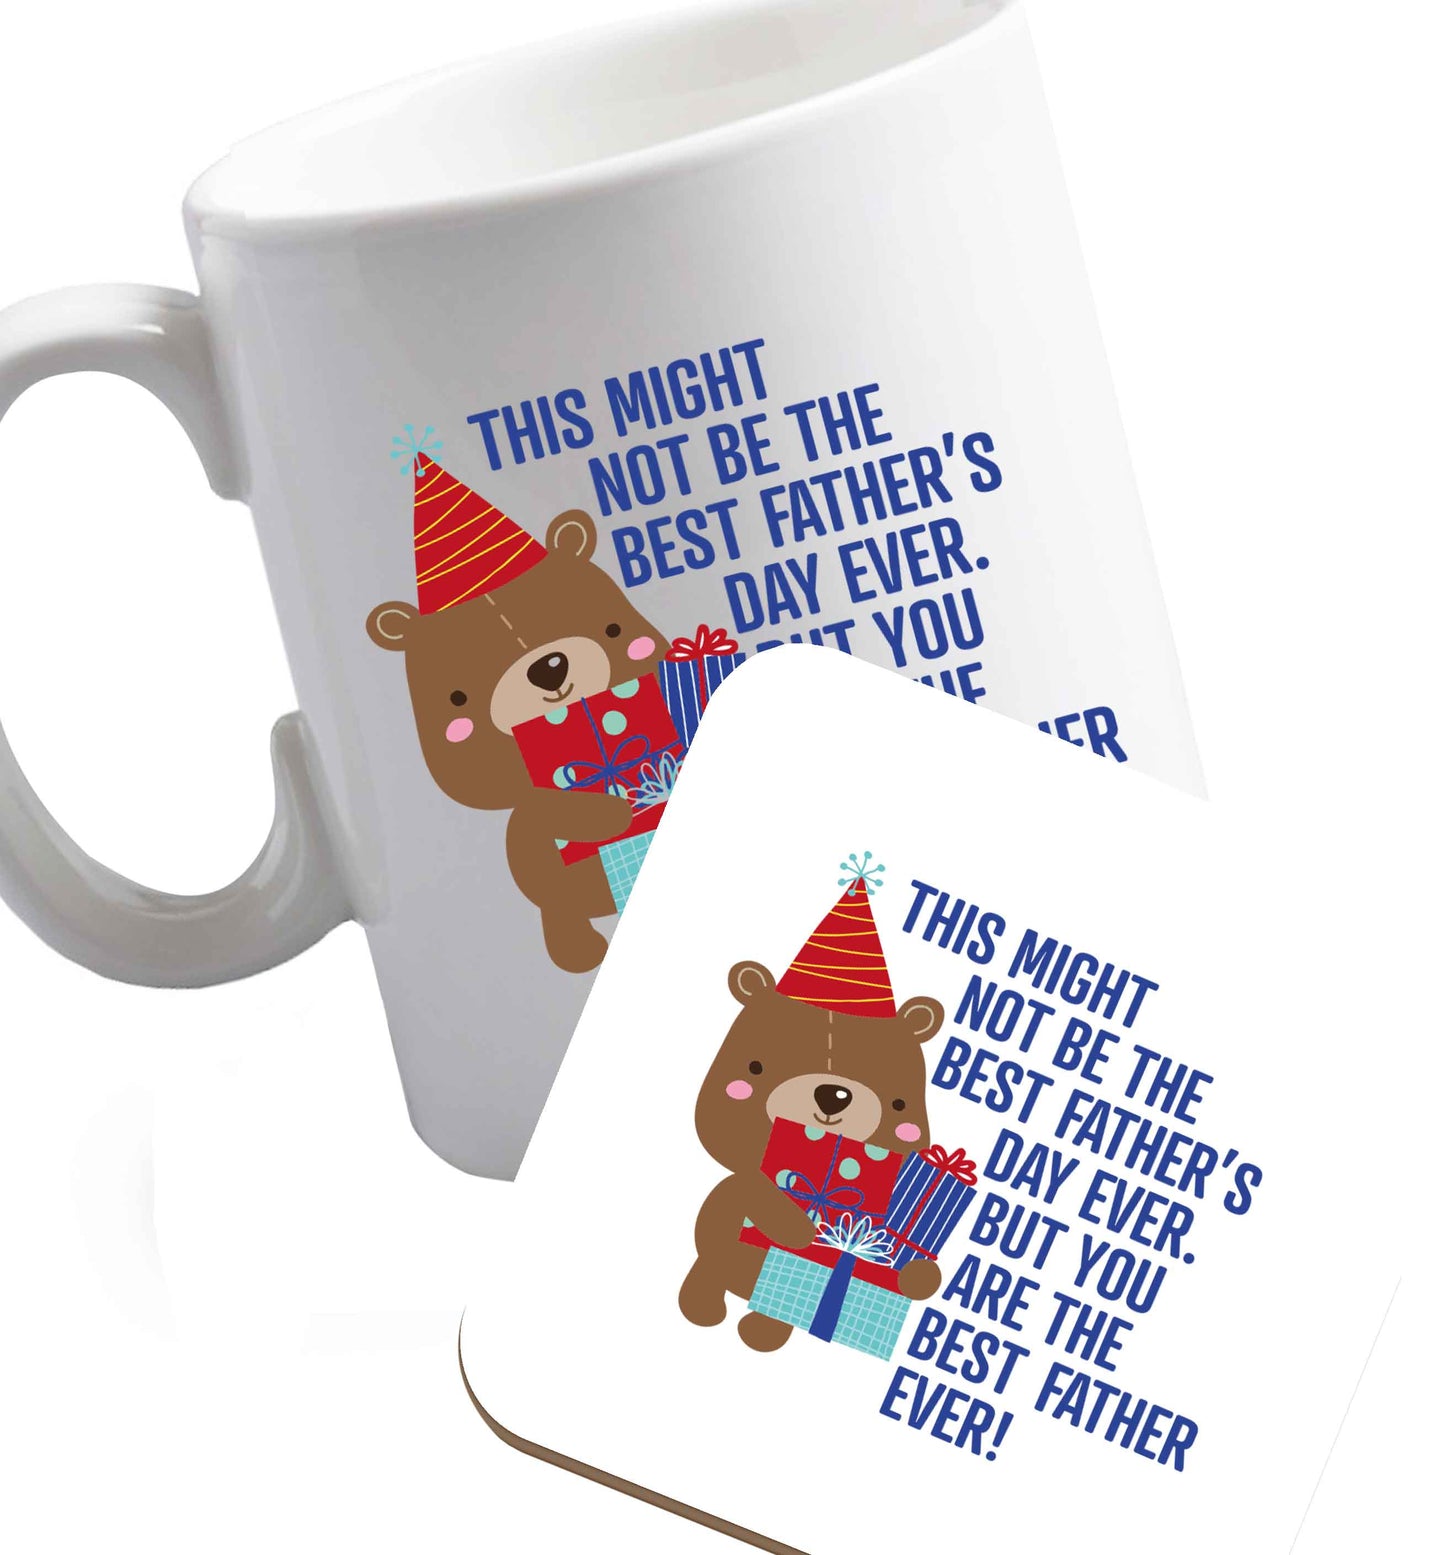 10 oz It might not be the best Father's Day ever but you are the best father ever! ceramic mug and coaster set right handed